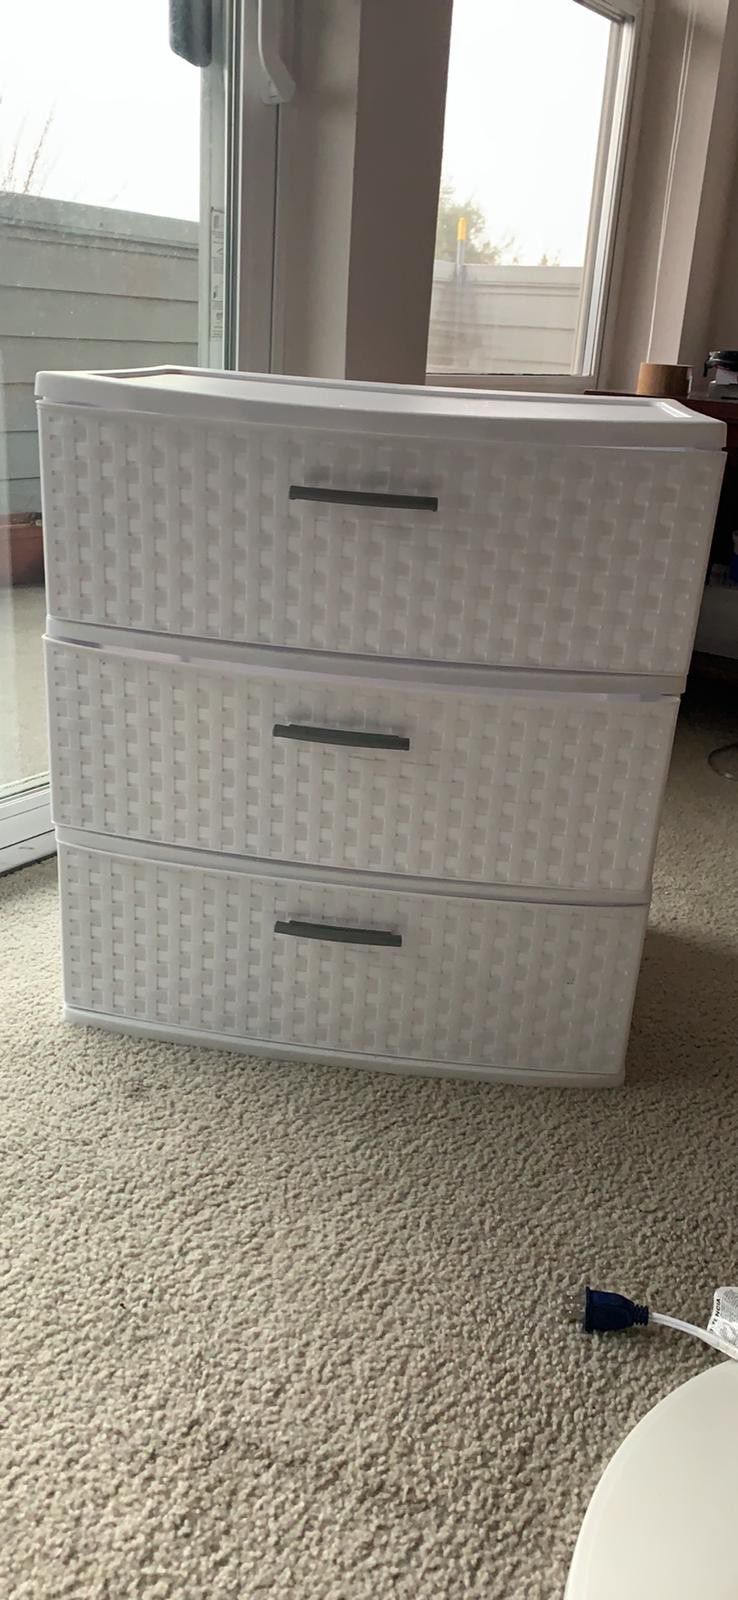 Tiered plastic drawers